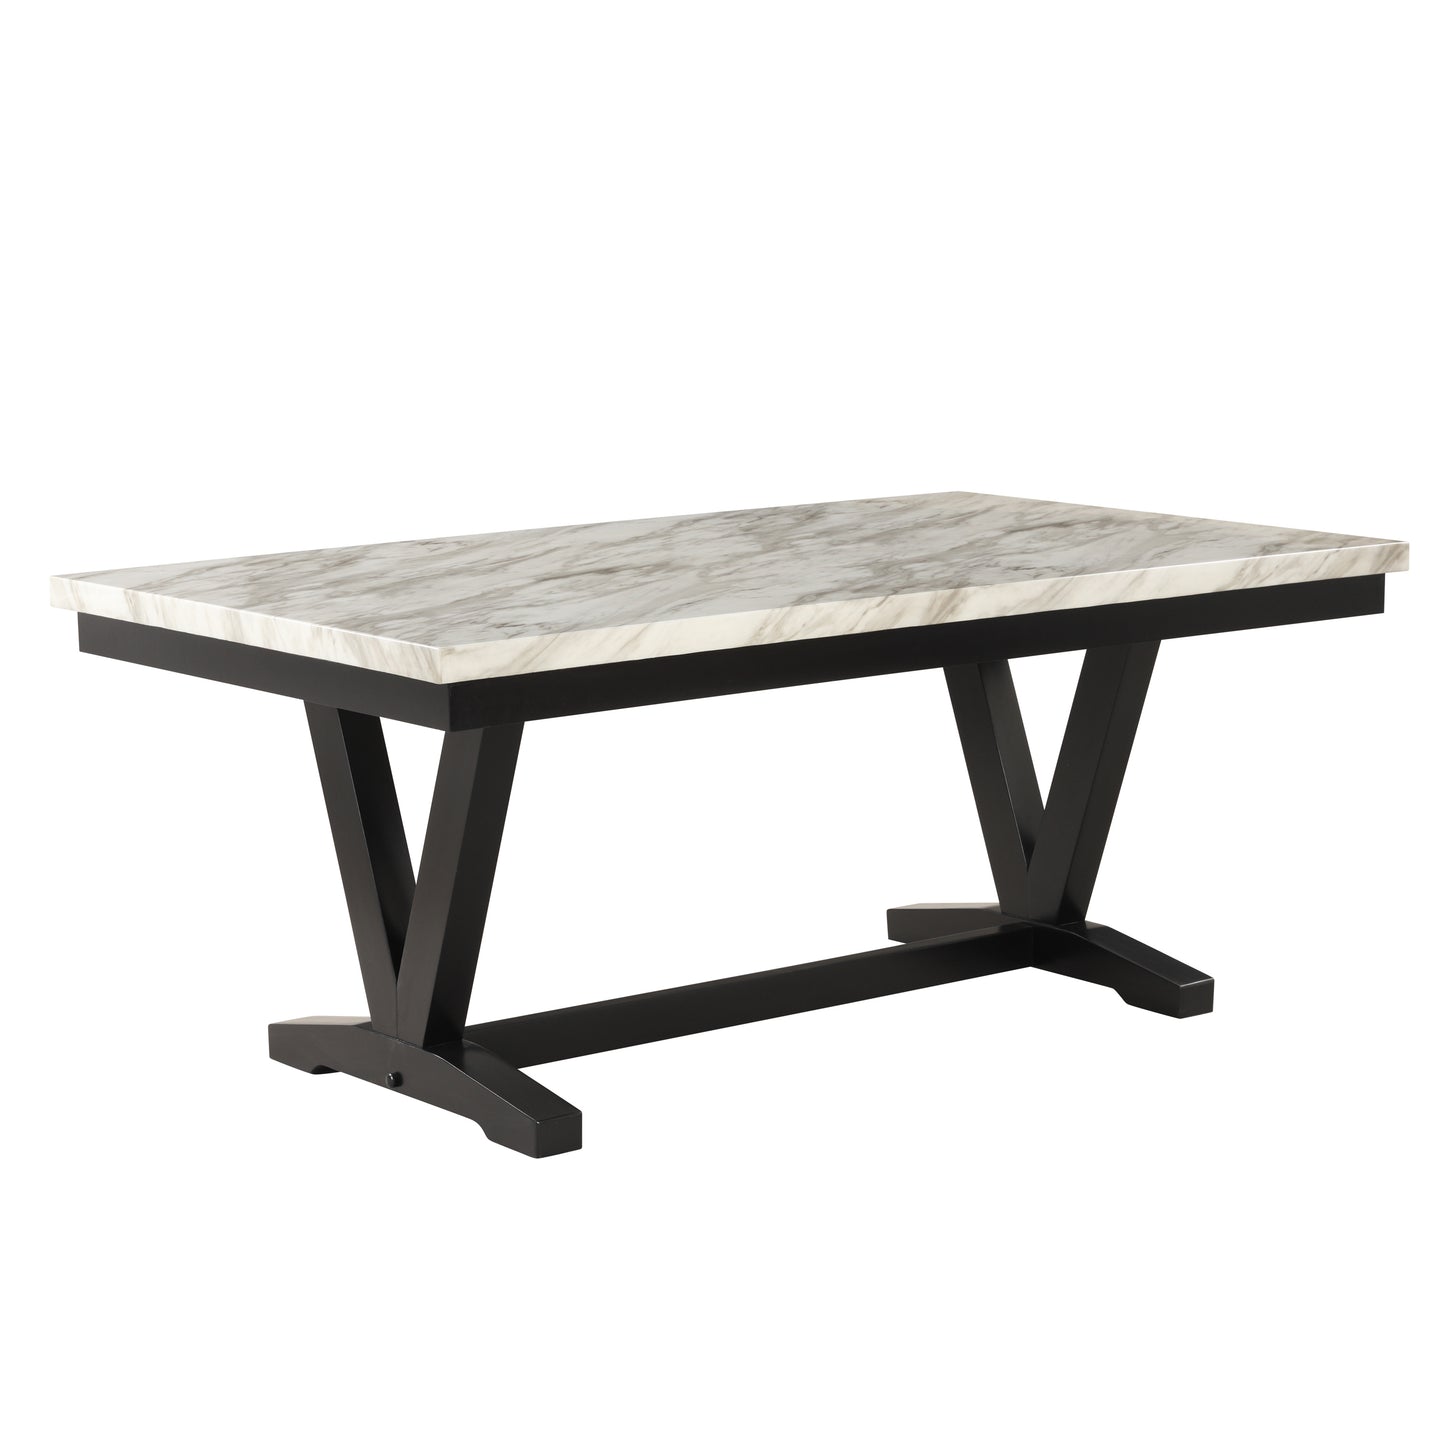 6-piece Dining Table Set with Faux Marble Top